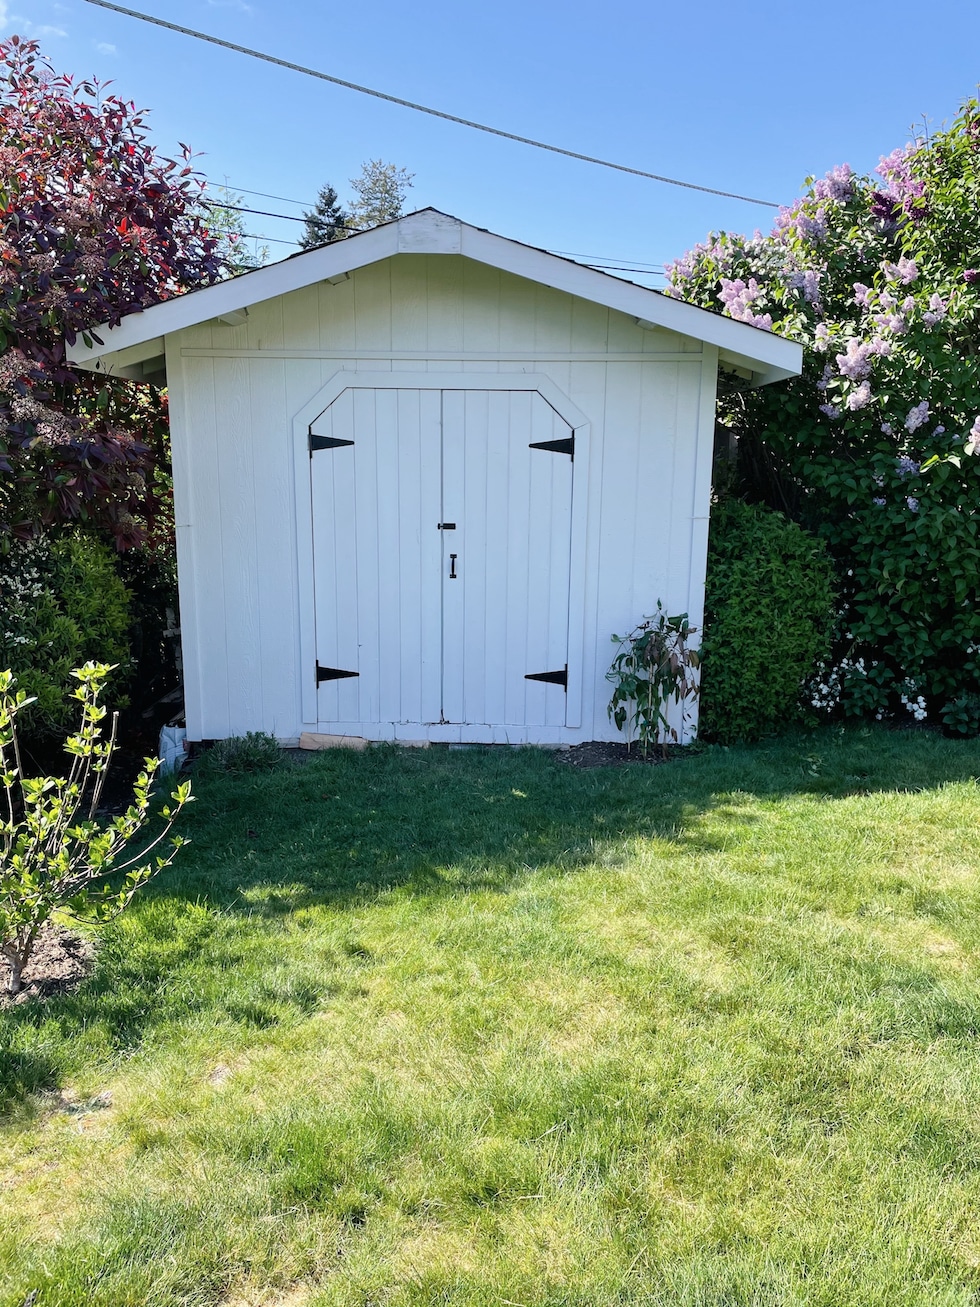 Help Me Redesign Our Garden Shed (+ Our Trick for Visualizing Design Changes)